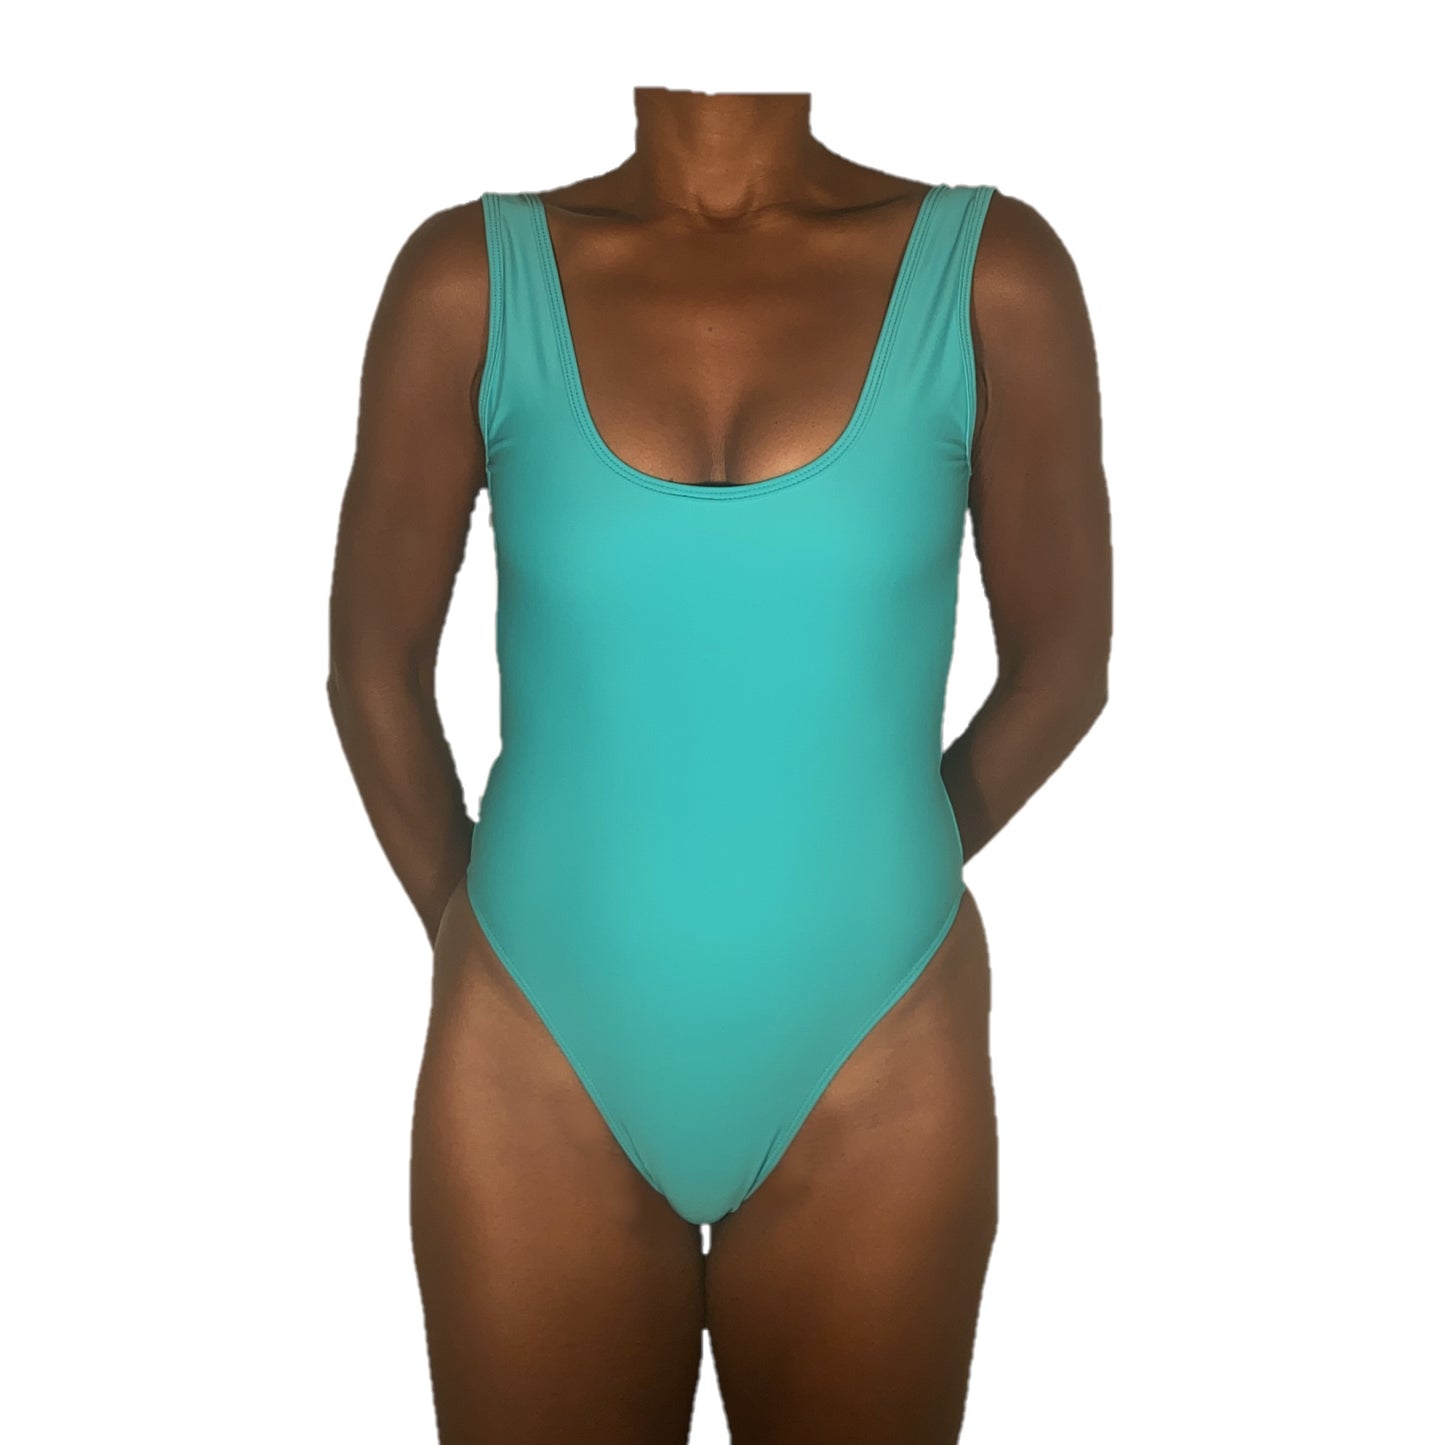 Cabana One Piece with Mesh in Aqua x Hot Pink